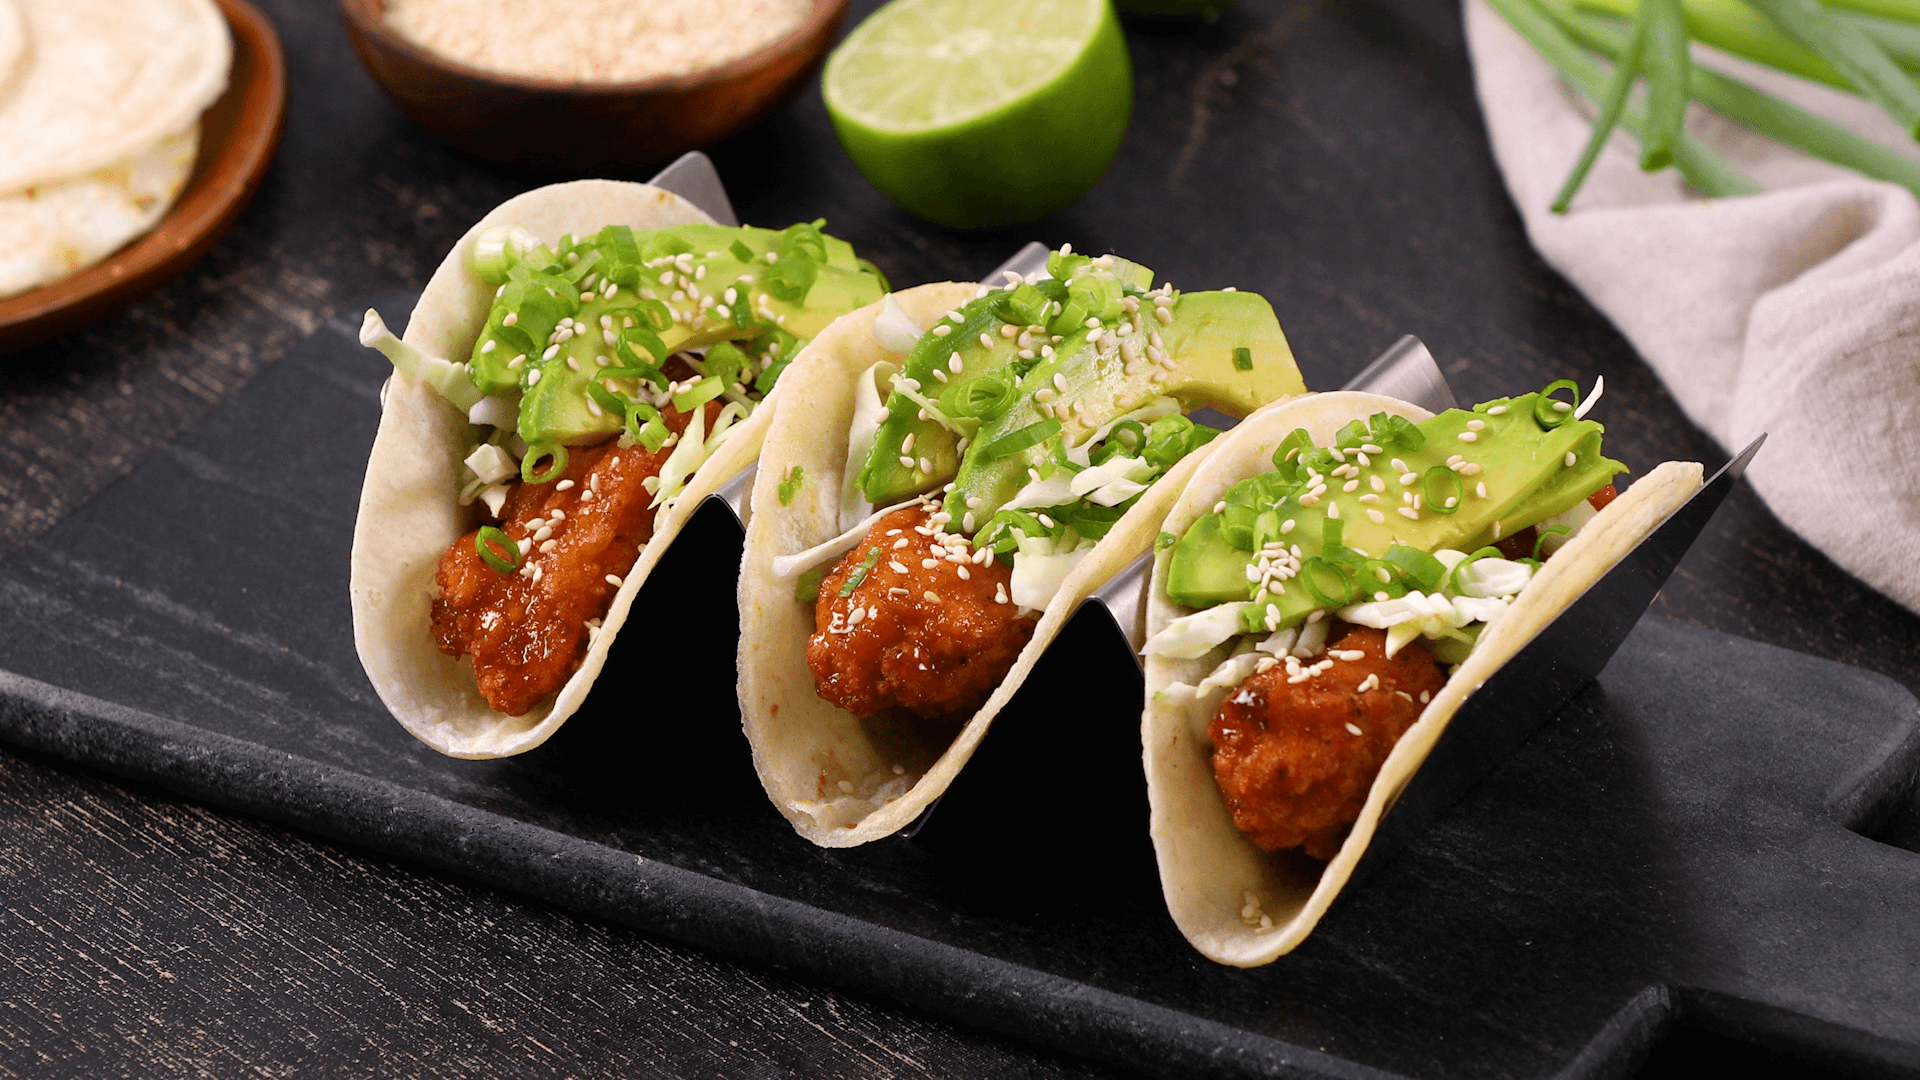 John Soules sweet and spicy orange chicken tacos